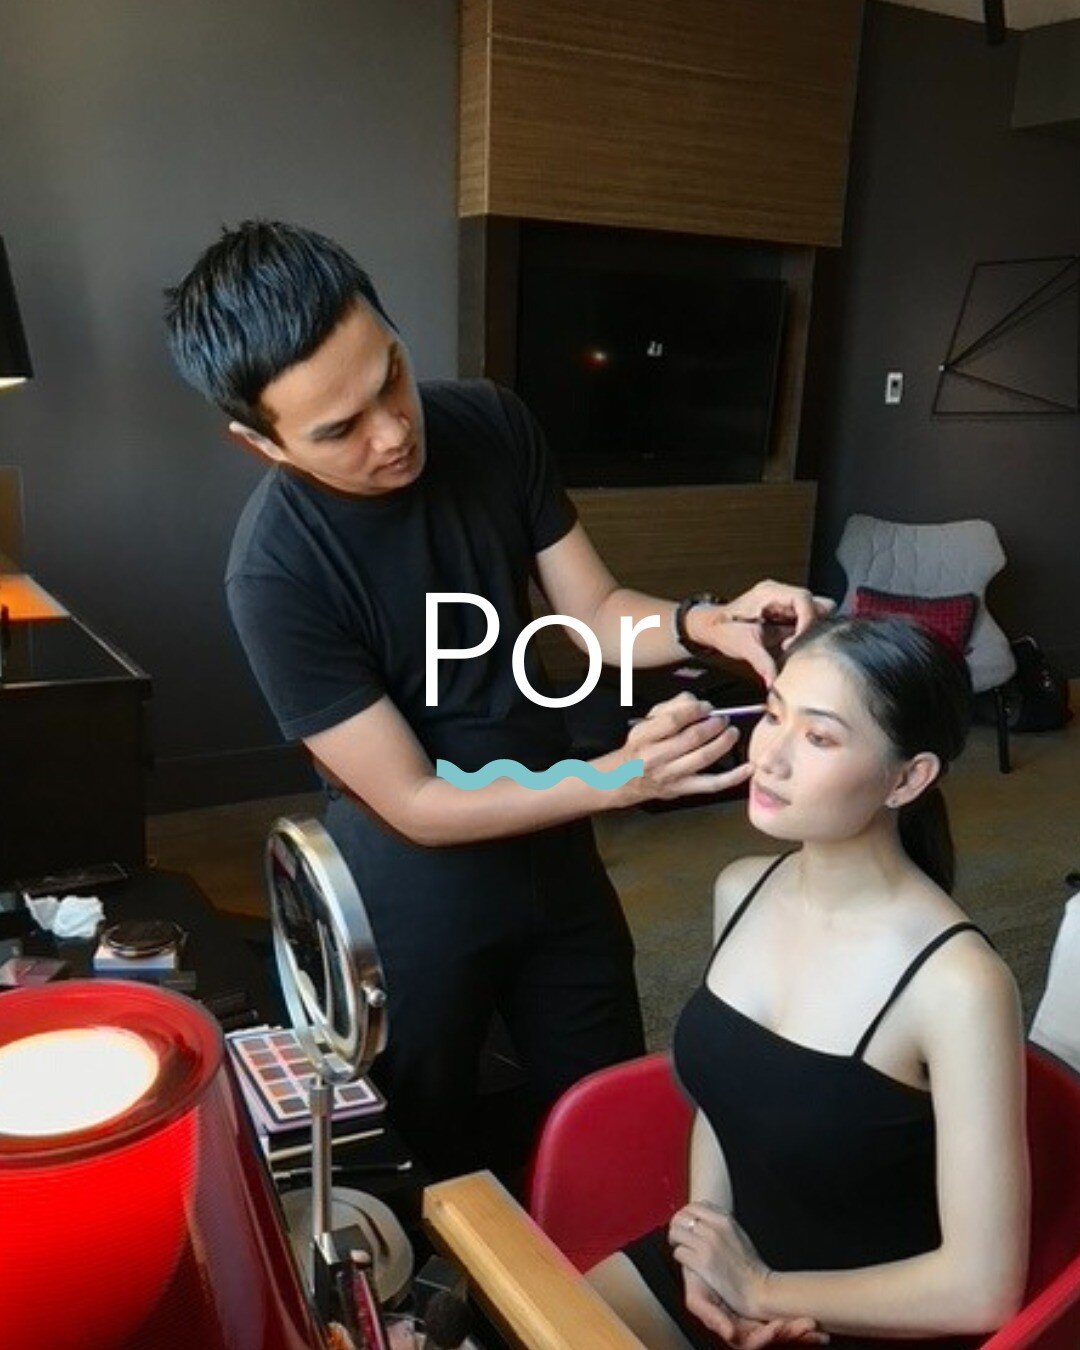 Meet Por, a professional makeup artist with 10 years of experience, here to empower his clients to feel and look their absolute best. With great attention to your features, Por works to highlight your unique beauty.

Your Senior Hair &amp; Makeup Art